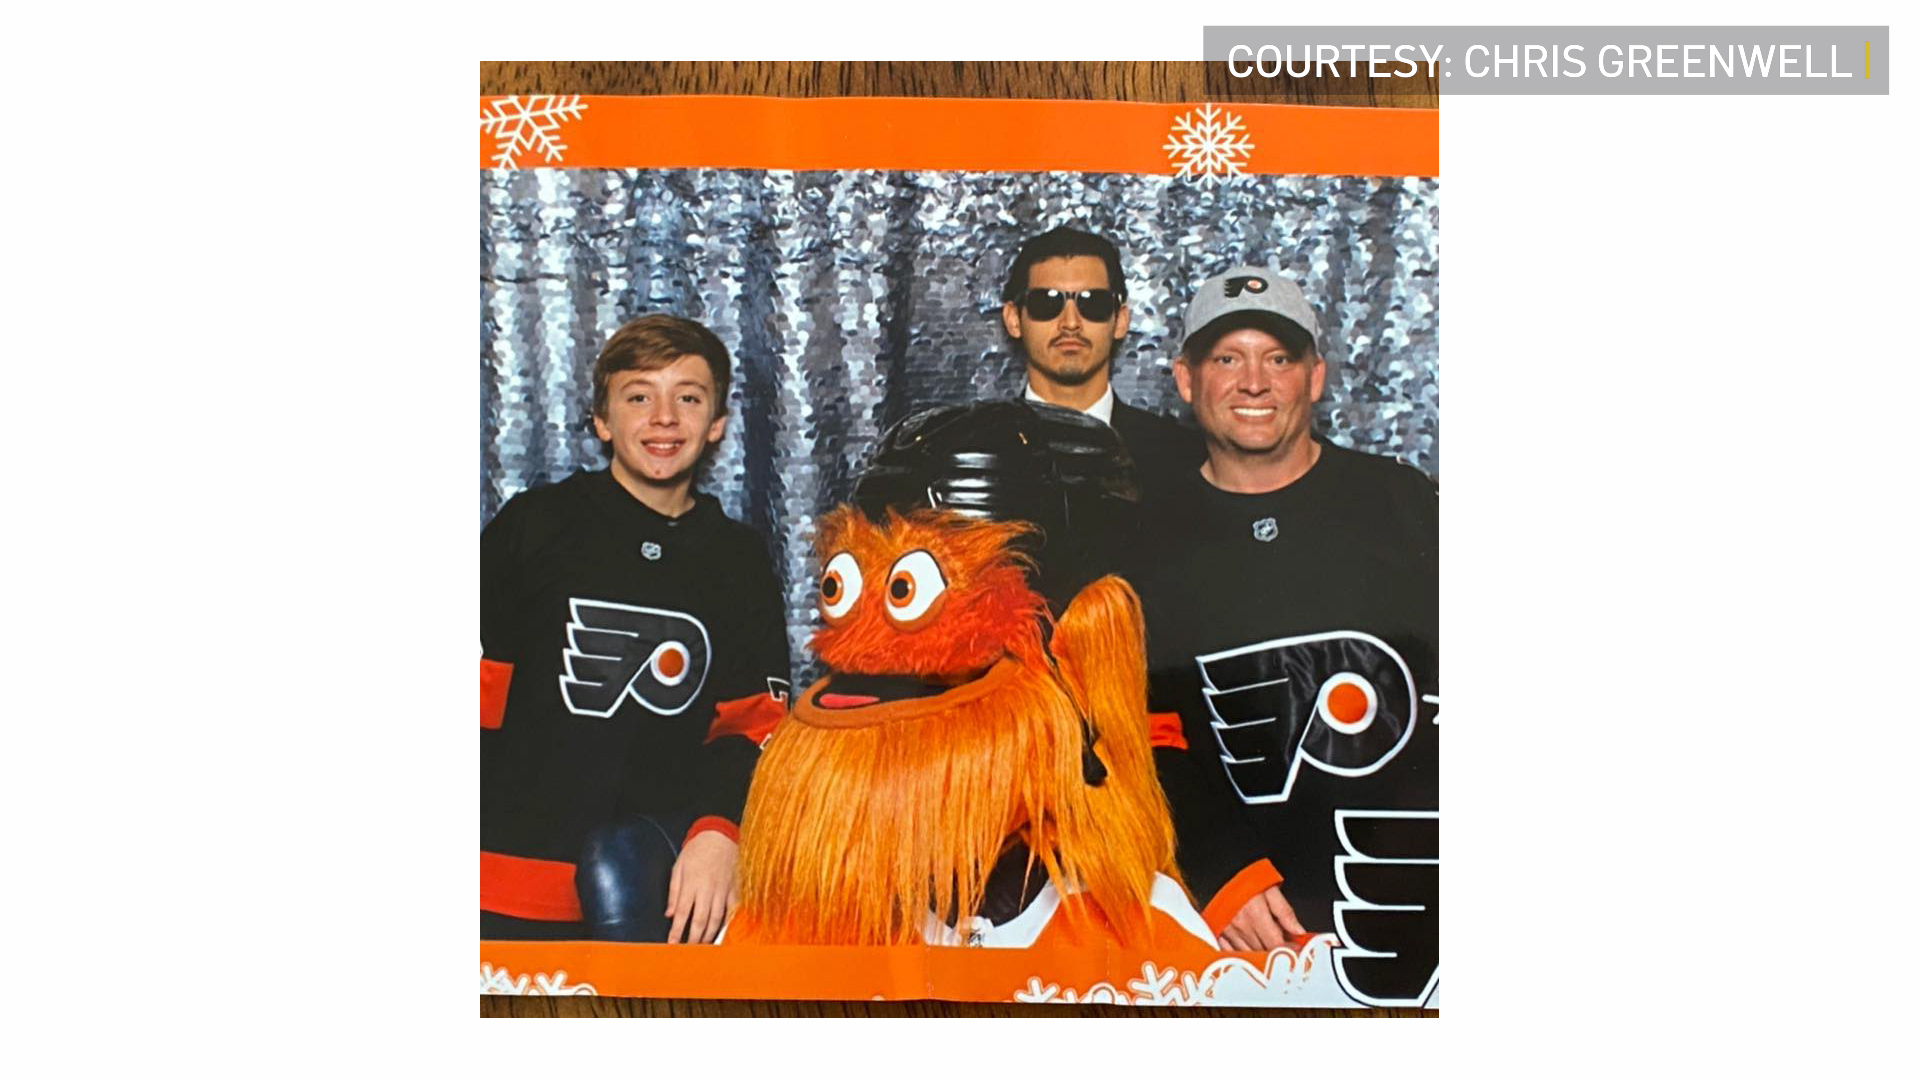 Flyers react to their new mascot, Gritty